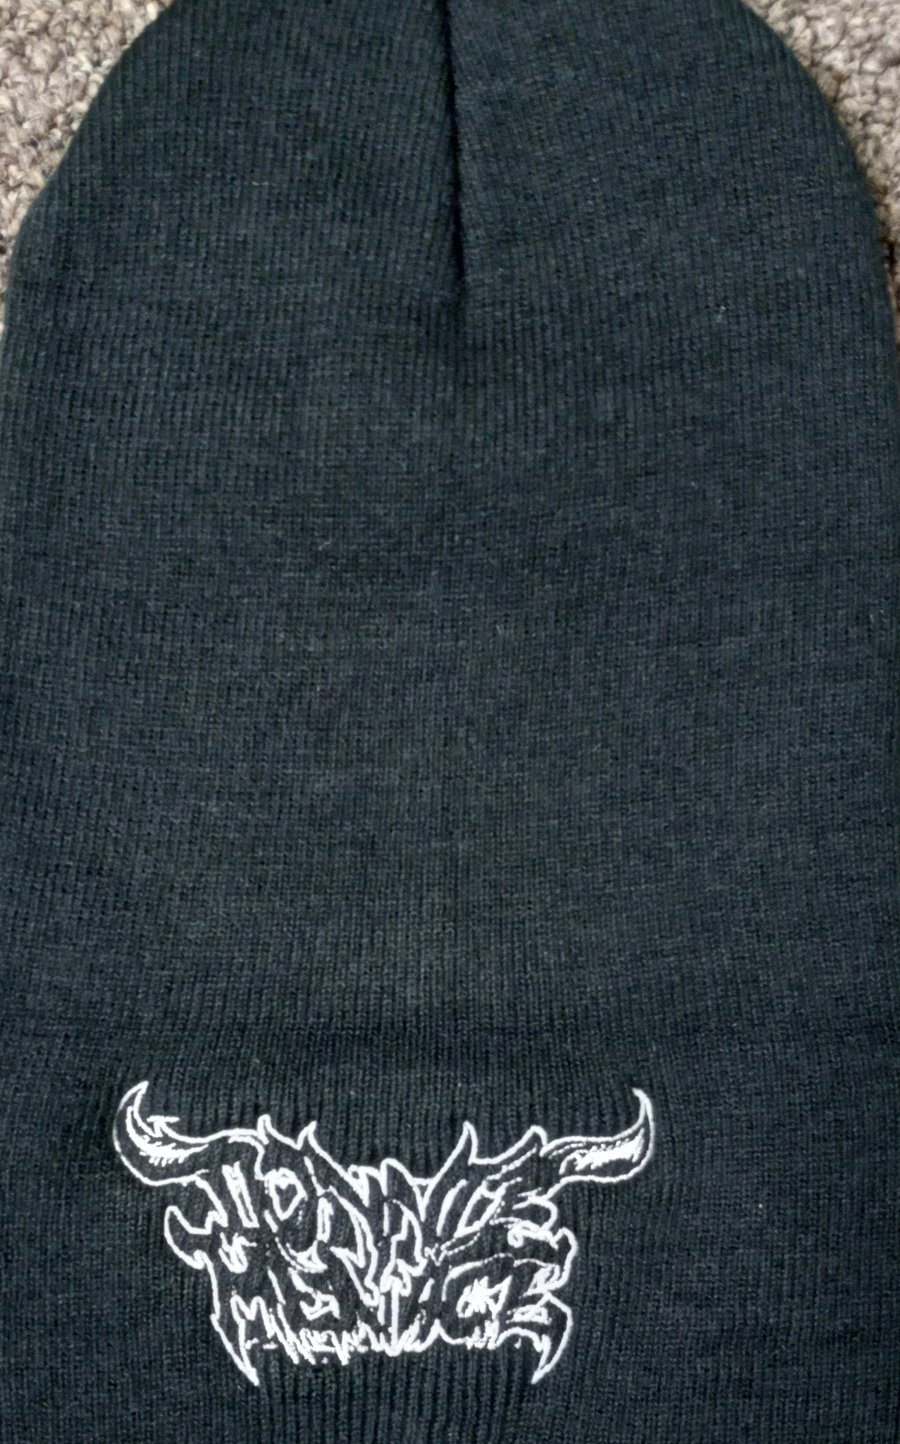 Image of DONNIE MENACE:  LOGO (assorted colors) Beanie